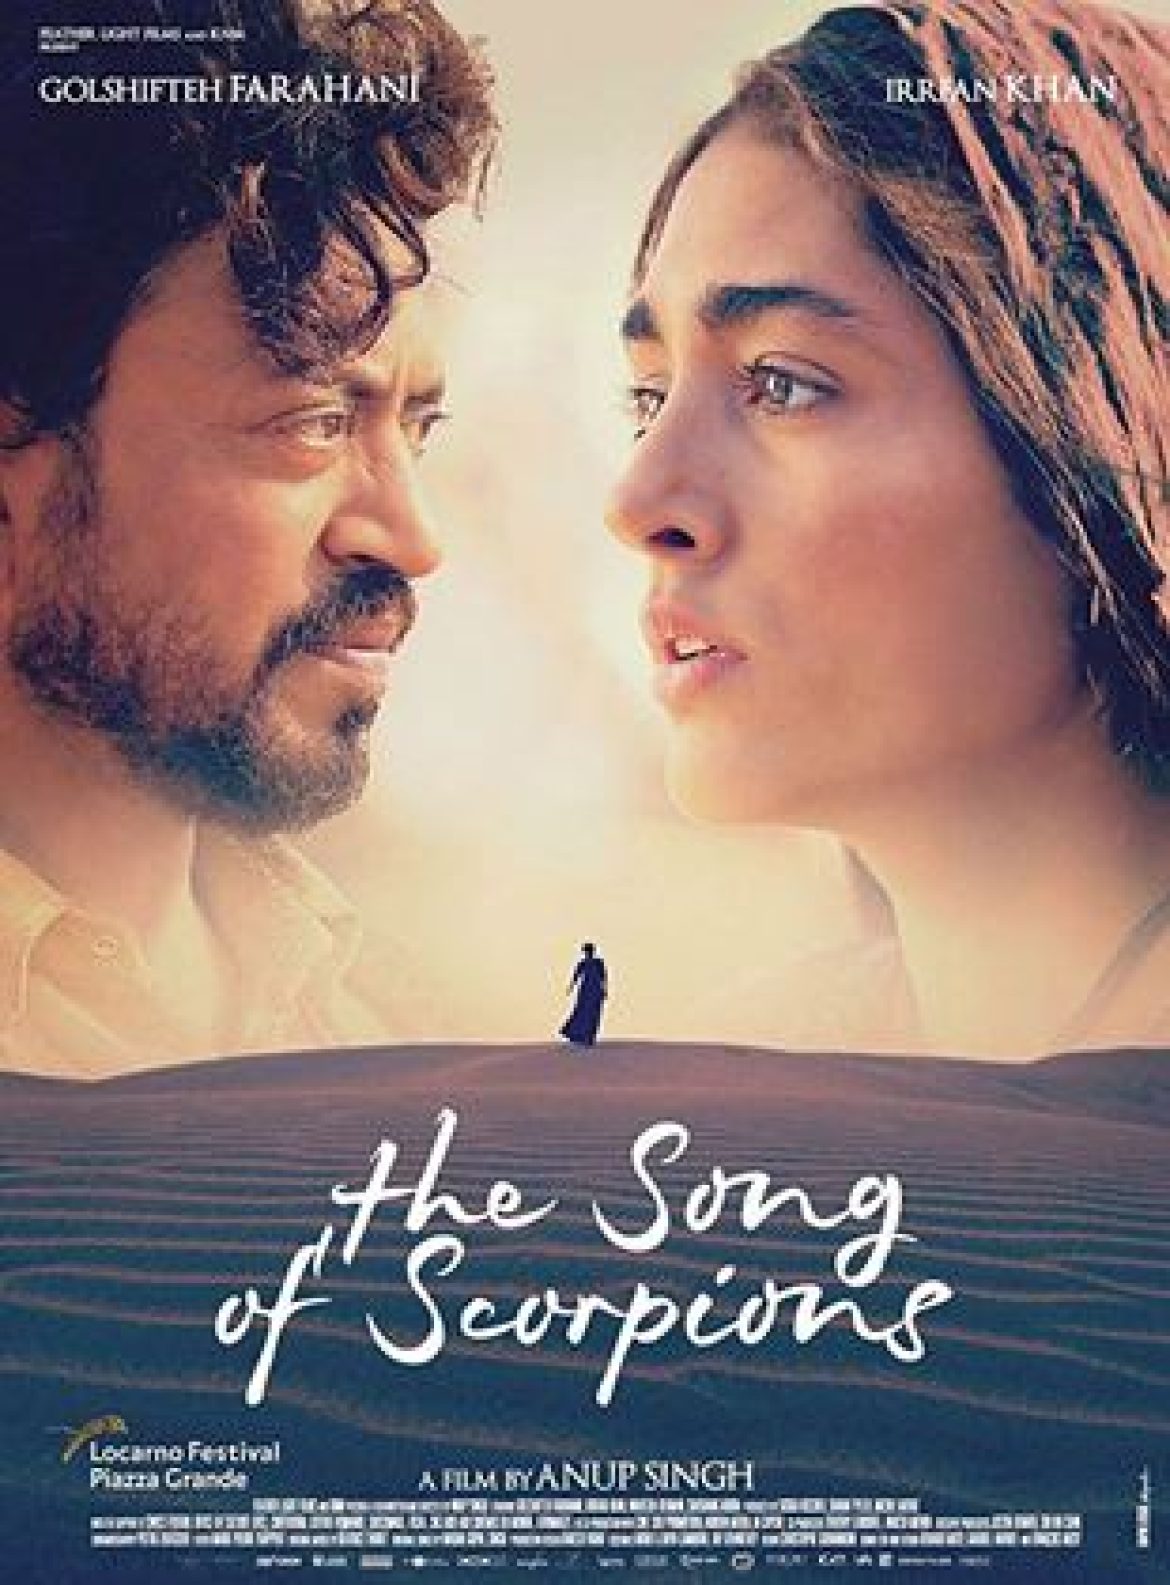 Films du Sud : The Song of Scorpion